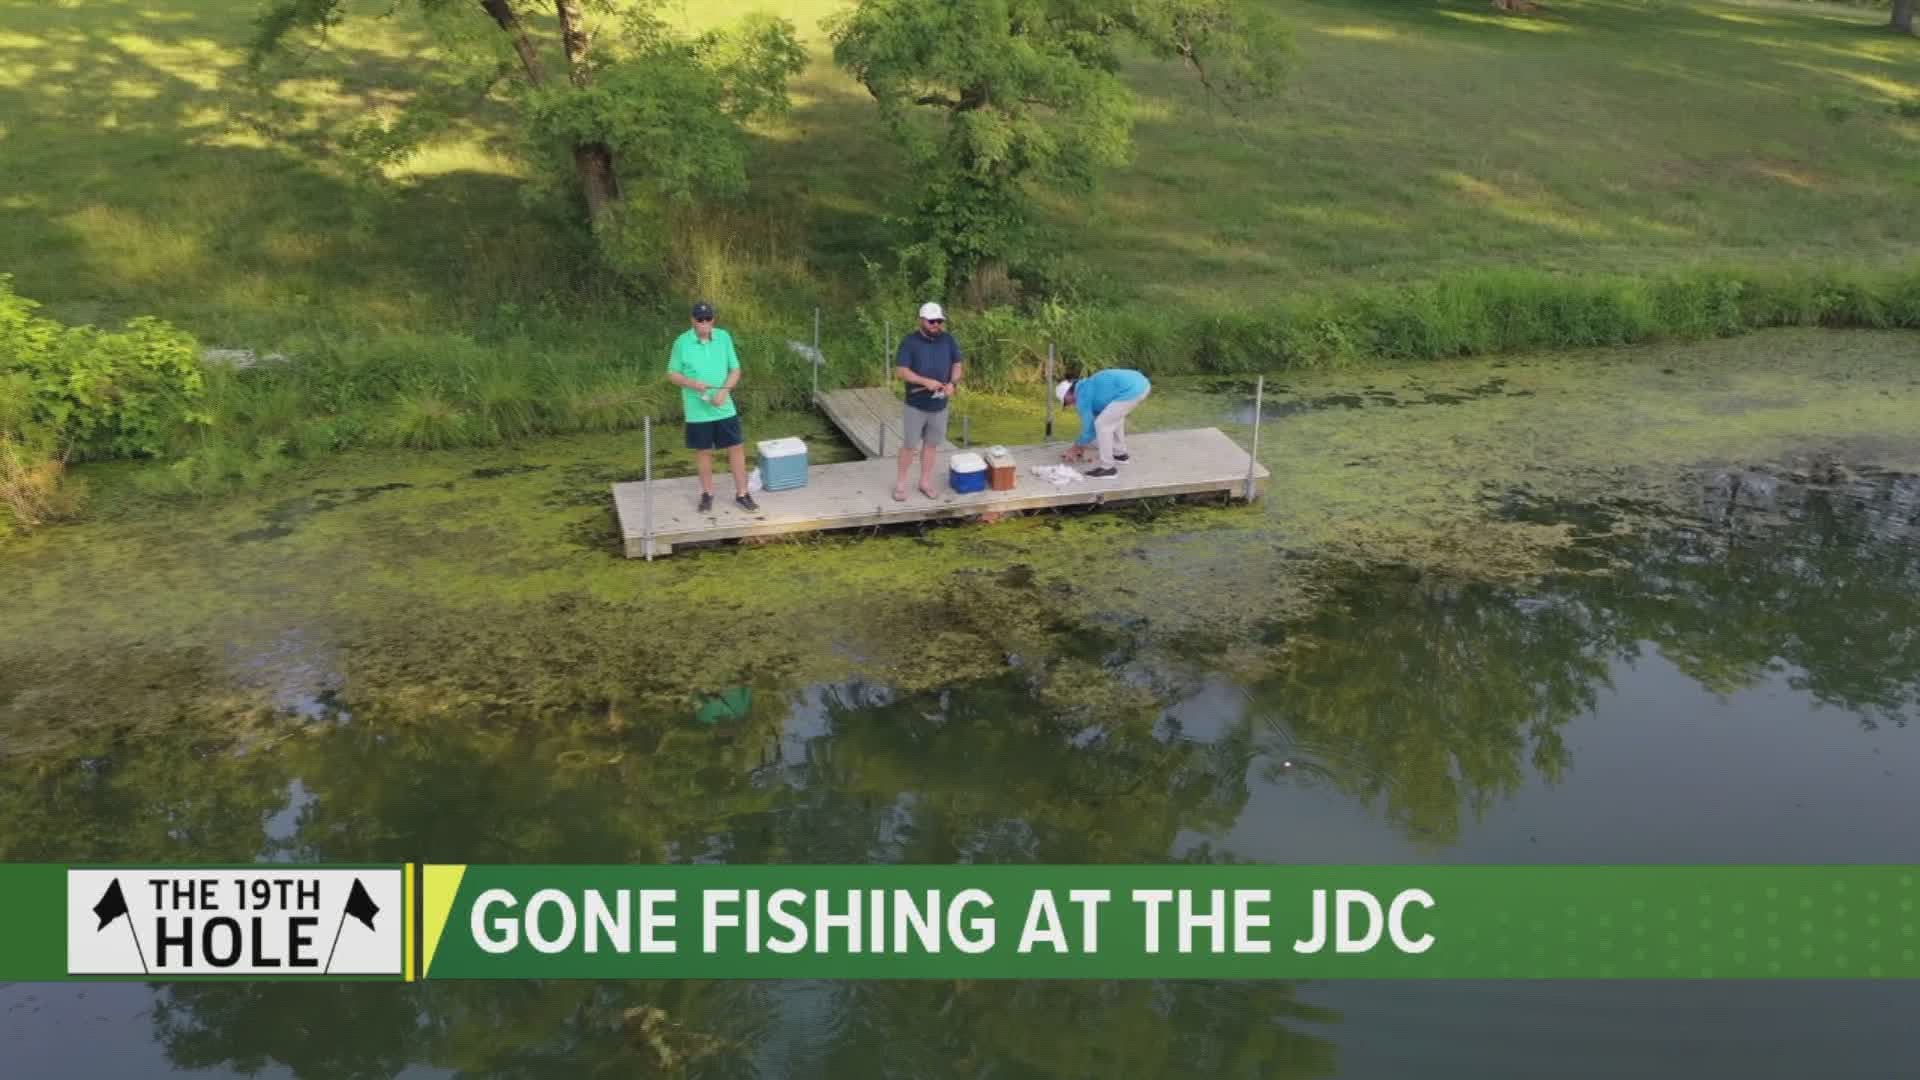 It's where golf talk is forbidden. Meet the 39-year JDC volunteer who spends the night before the tournament out fishing with two golf industry employees.